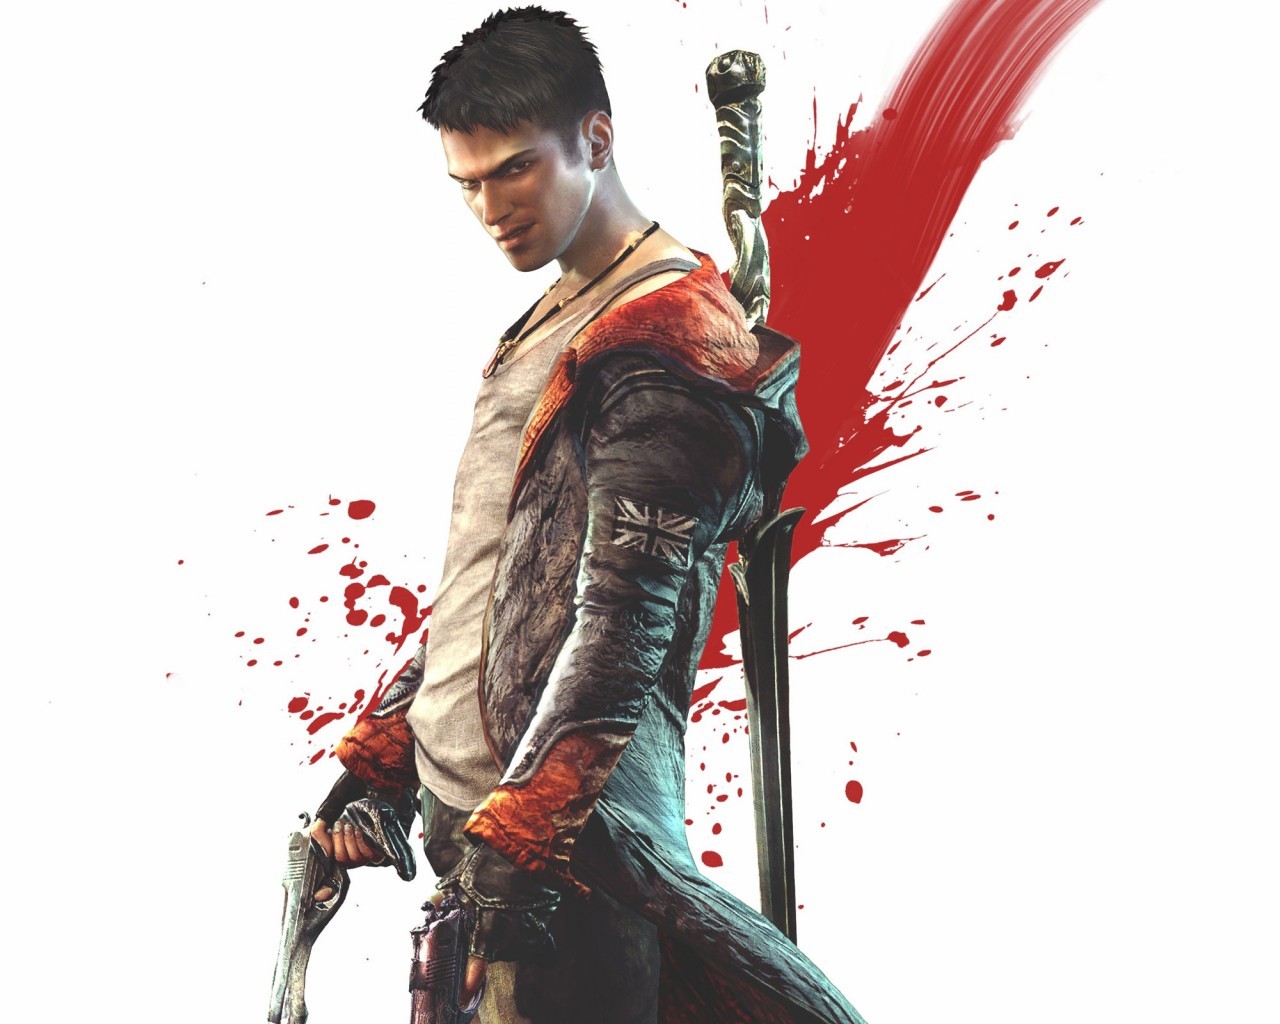 21249 download wallpaper games, devil may cry screensavers and pictures for free